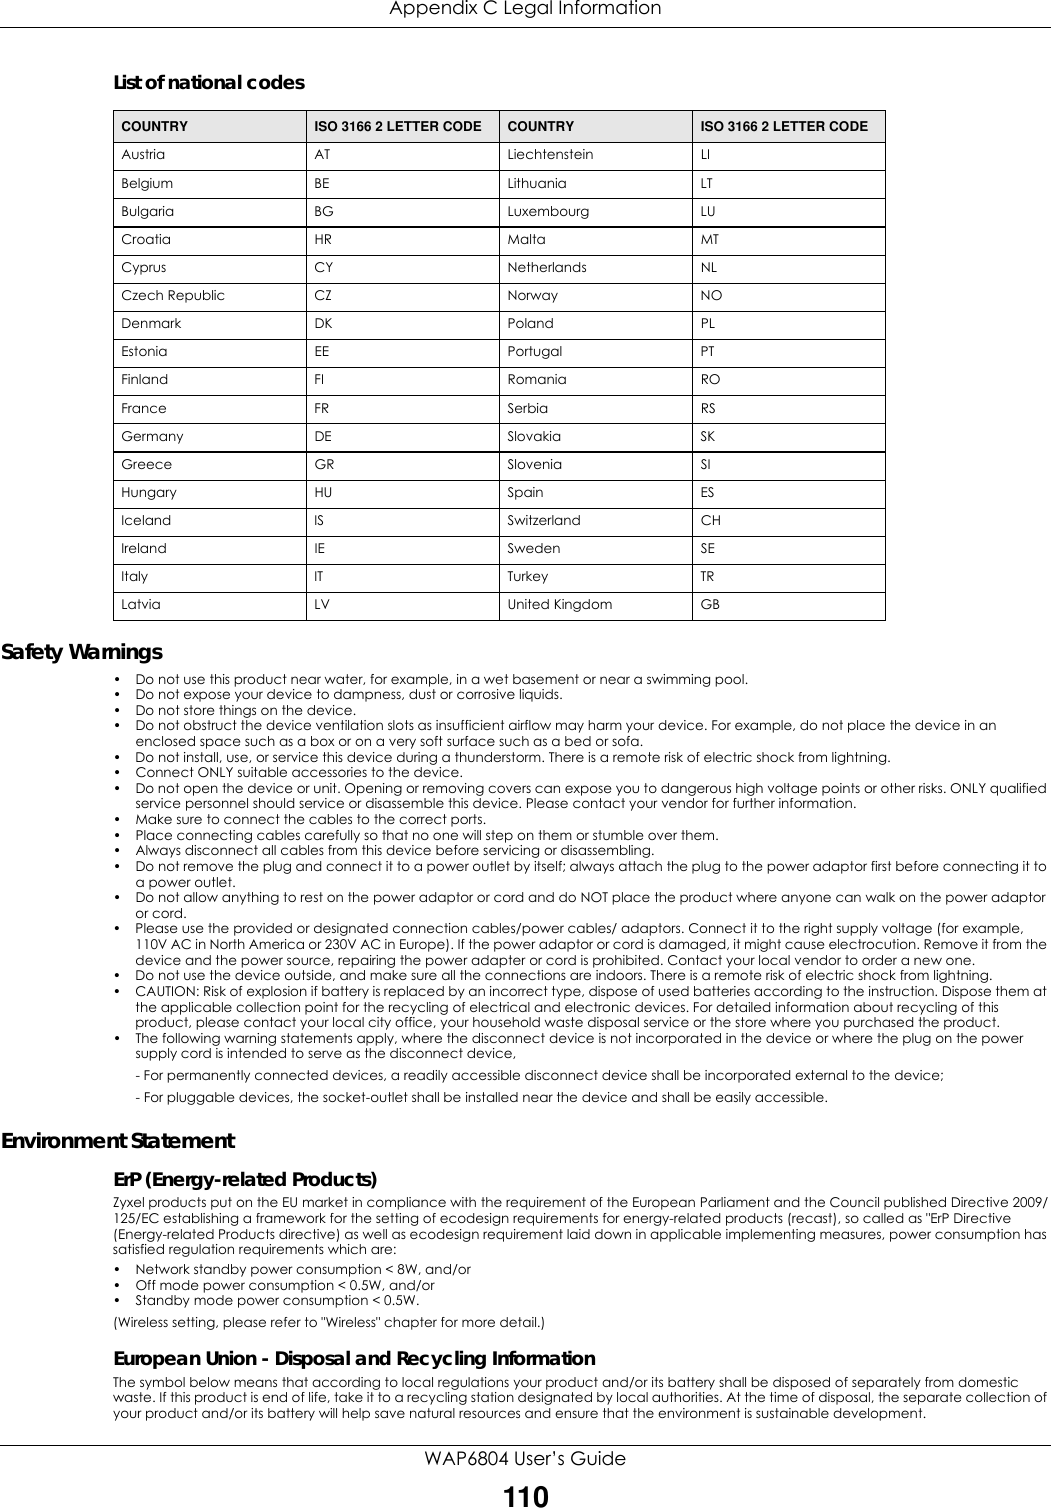 Appendix C Legal InformationWAP6804 User’s Guide110List of national codesSafety Warnings• Do not use this product near water, for example, in a wet basement or near a swimming pool.• Do not expose your device to dampness, dust or corrosive liquids.• Do not store things on the device.• Do not obstruct the device ventilation slots as insufficient airflow may harm your device. For example, do not place the device in an enclosed space such as a box or on a very soft surface such as a bed or sofa.• Do not install, use, or service this device during a thunderstorm. There is a remote risk of electric shock from lightning.• Connect ONLY suitable accessories to the device.• Do not open the device or unit. Opening or removing covers can expose you to dangerous high voltage points or other risks. ONLY qualified service personnel should service or disassemble this device. Please contact your vendor for further information.• Make sure to connect the cables to the correct ports.• Place connecting cables carefully so that no one will step on them or stumble over them.• Always disconnect all cables from this device before servicing or disassembling.• Do not remove the plug and connect it to a power outlet by itself; always attach the plug to the power adaptor first before connecting it to a power outlet.• Do not allow anything to rest on the power adaptor or cord and do NOT place the product where anyone can walk on the power adaptor or cord.• Please use the provided or designated connection cables/power cables/ adaptors. Connect it to the right supply voltage (for example, 110V AC in North America or 230V AC in Europe). If the power adaptor or cord is damaged, it might cause electrocution. Remove it from the device and the power source, repairing the power adapter or cord is prohibited. Contact your local vendor to order a new one.• Do not use the device outside, and make sure all the connections are indoors. There is a remote risk of electric shock from lightning.• CAUTION: Risk of explosion if battery is replaced by an incorrect type, dispose of used batteries according to the instruction. Dispose them at the applicable collection point for the recycling of electrical and electronic devices. For detailed information about recycling of this product, please contact your local city office, your household waste disposal service or the store where you purchased the product.• The following warning statements apply, where the disconnect device is not incorporated in the device or where the plug on the power supply cord is intended to serve as the disconnect device,- For permanently connected devices, a readily accessible disconnect device shall be incorporated external to the device;- For pluggable devices, the socket-outlet shall be installed near the device and shall be easily accessible.Environment StatementErP (Energy-related Products) Zyxel products put on the EU market in compliance with the requirement of the European Parliament and the Council published Directive 2009/125/EC establishing a framework for the setting of ecodesign requirements for energy-related products (recast), so called as &quot;ErP Directive (Energy-related Products directive) as well as ecodesign requirement laid down in applicable implementing measures, power consumption has satisfied regulation requirements which are:• Network standby power consumption &lt; 8W, and/or• Off mode power consumption &lt; 0.5W, and/or• Standby mode power consumption &lt; 0.5W.(Wireless setting, please refer to &quot;Wireless&quot; chapter for more detail.)European Union - Disposal and Recycling InformationThe symbol below means that according to local regulations your product and/or its battery shall be disposed of separately from domestic waste. If this product is end of life, take it to a recycling station designated by local authorities. At the time of disposal, the separate collection of your product and/or its battery will help save natural resources and ensure that the environment is sustainable development.COUNTRY ISO 3166 2 LETTER CODE COUNTRY ISO 3166 2 LETTER CODEAustria AT Liechtenstein LIBelgium BE Lithuania LTBulgaria BG Luxembourg LUCroatia HR Malta MTCyprus CY Netherlands NLCzech Republic CZ Norway NODenmark DK Poland PLEstonia EE Portugal PTFinland FI Romania ROFrance FR Serbia RSGermany DE Slovakia SKGreece GR Slovenia SIHungary HU Spain ESIceland IS Switzerland CHIreland IE Sweden SEItaly IT Turkey TRLatvia LV United Kingdom GB